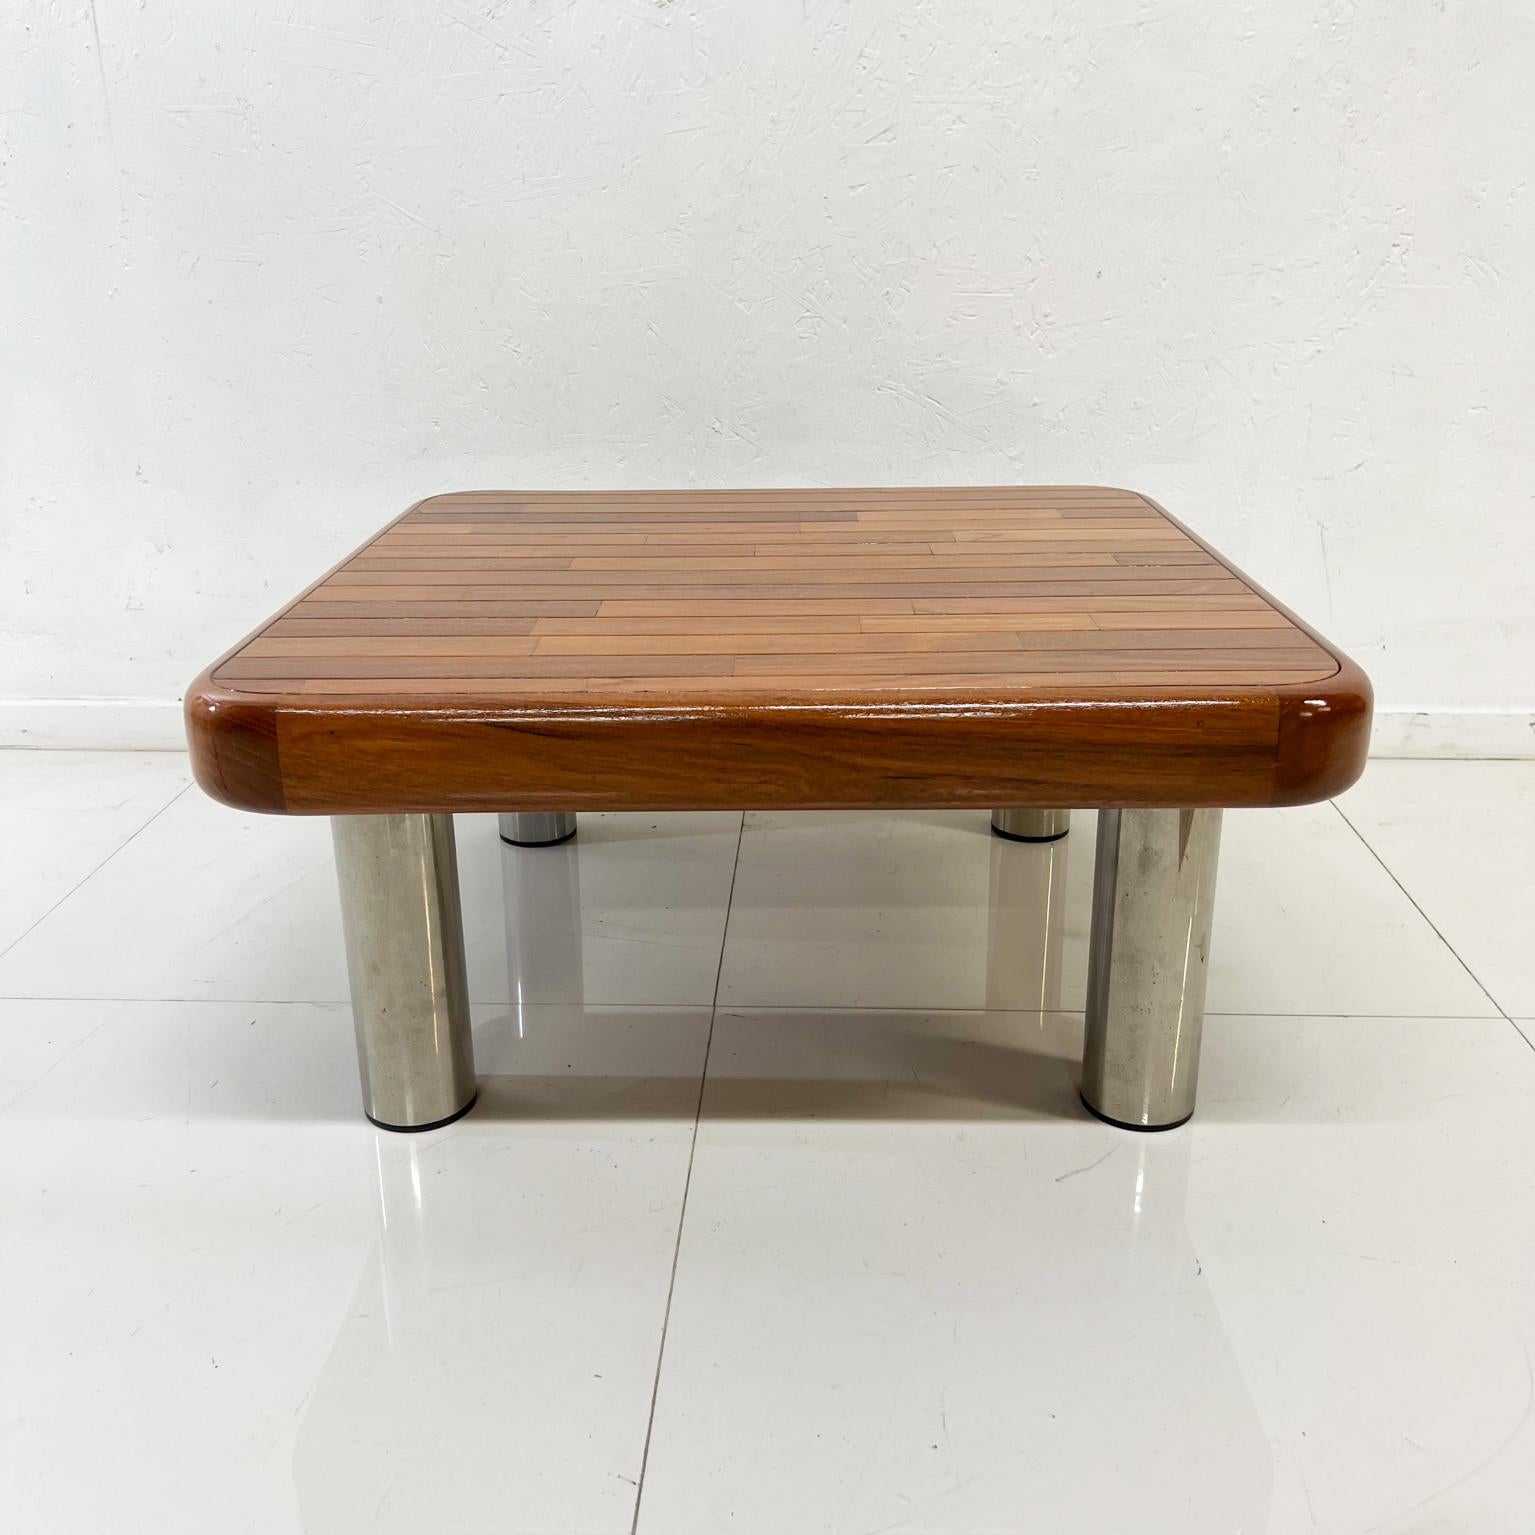 1970s Coffee Table Staved Wood Tubular Chrome Legs
Unmarked.
Modern square low table having an expressive Wood grained top with fat tubular Chromed legs.
13 tall x 28 x 28
Original vintage condition.
Refer to images provided.
      